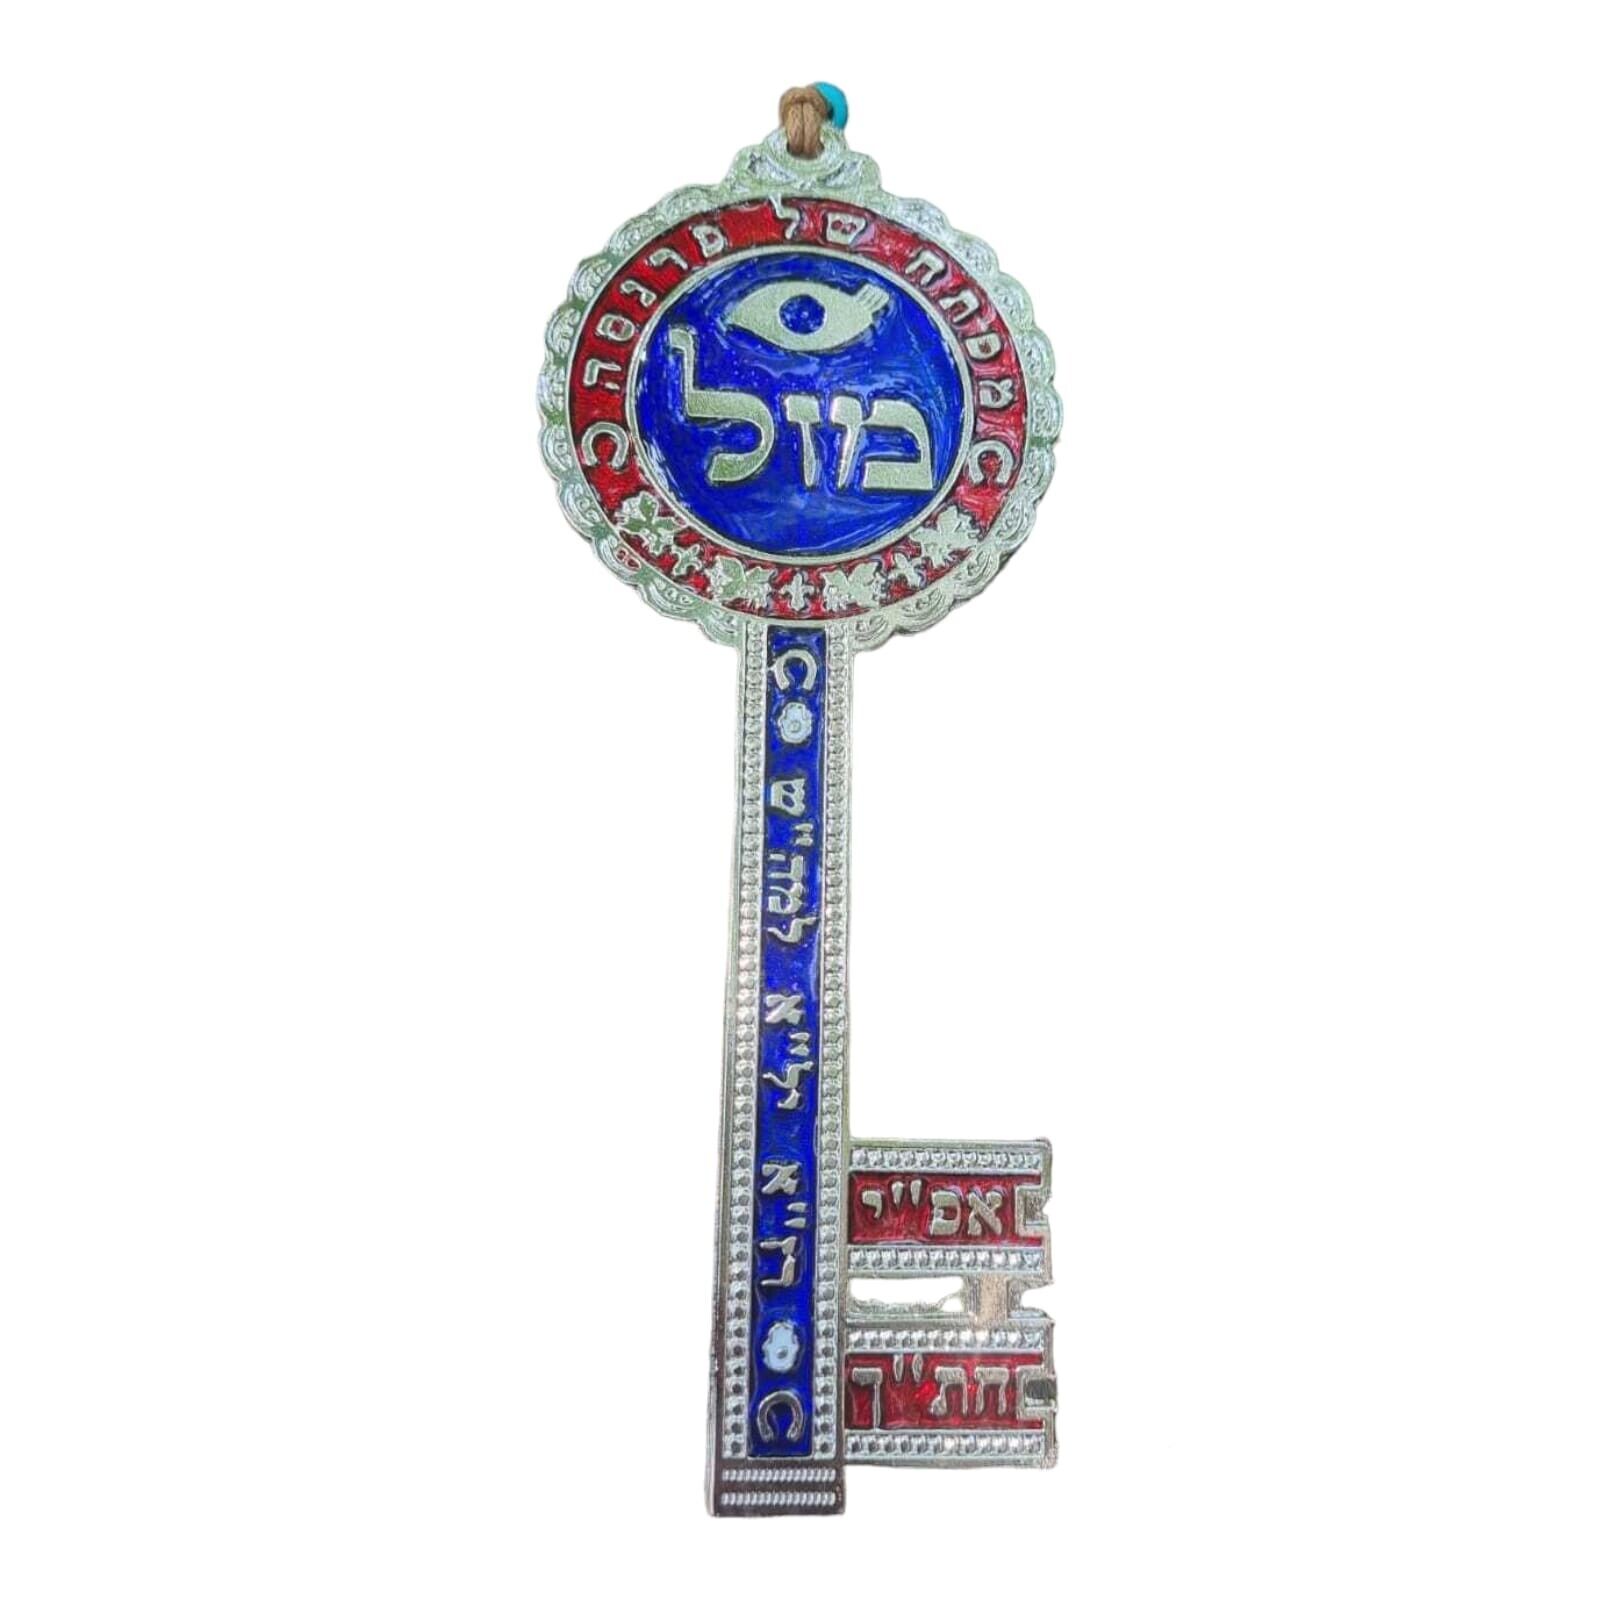 The key of wealth kabbalah amulet pewter wall hanging mIsrael bless for money